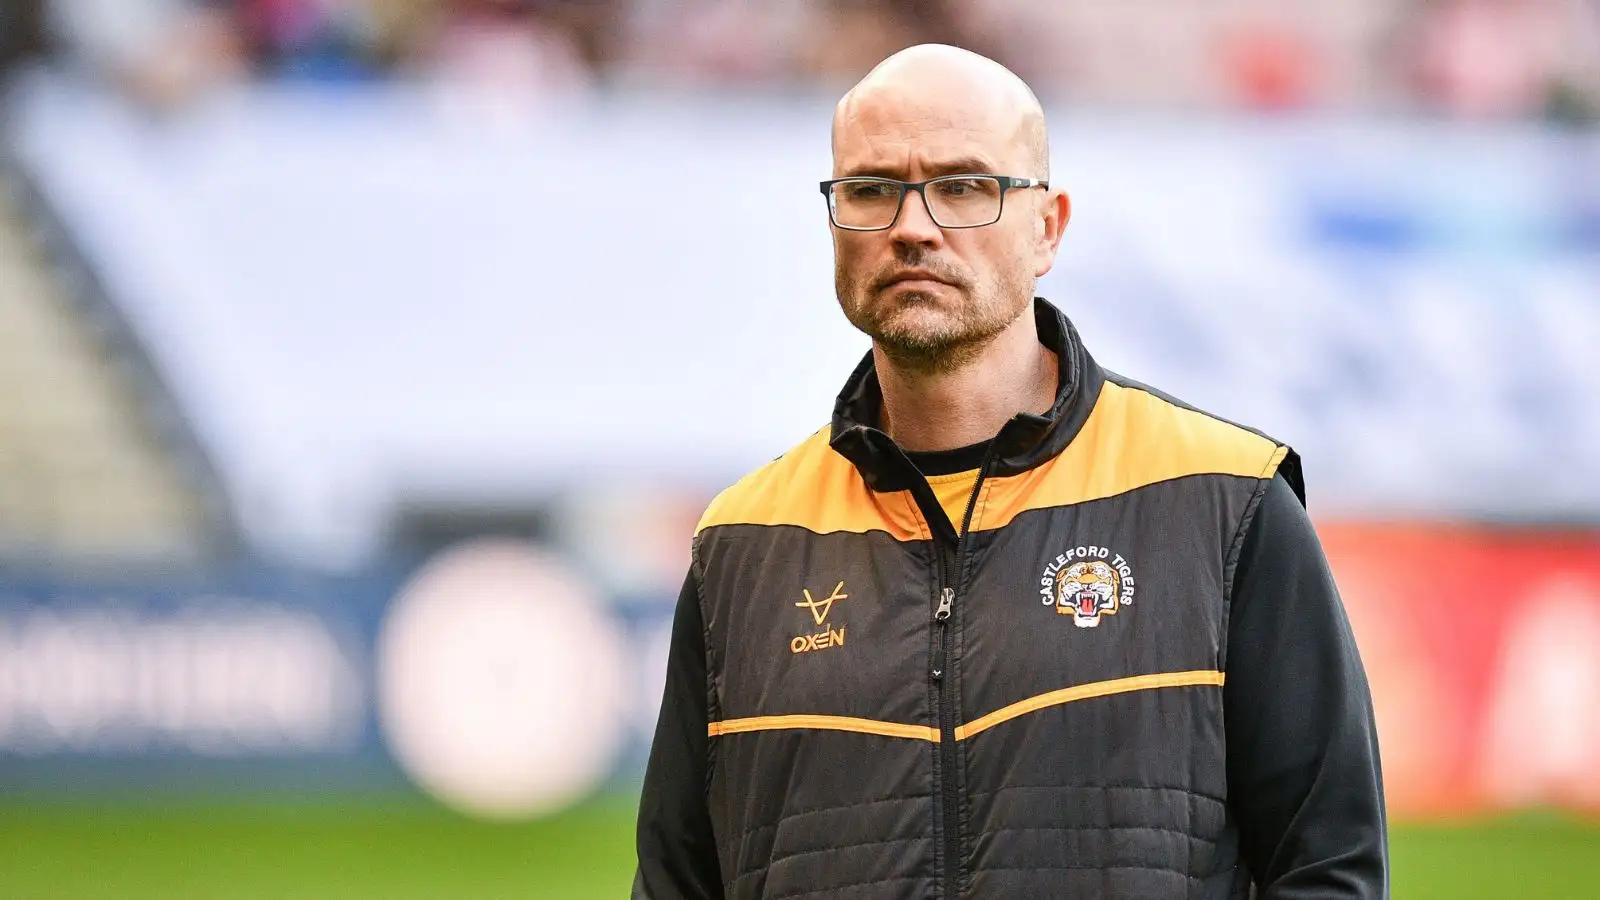 Castleford Tigers coach delivers passionate plea for international game after low-key England-France Test